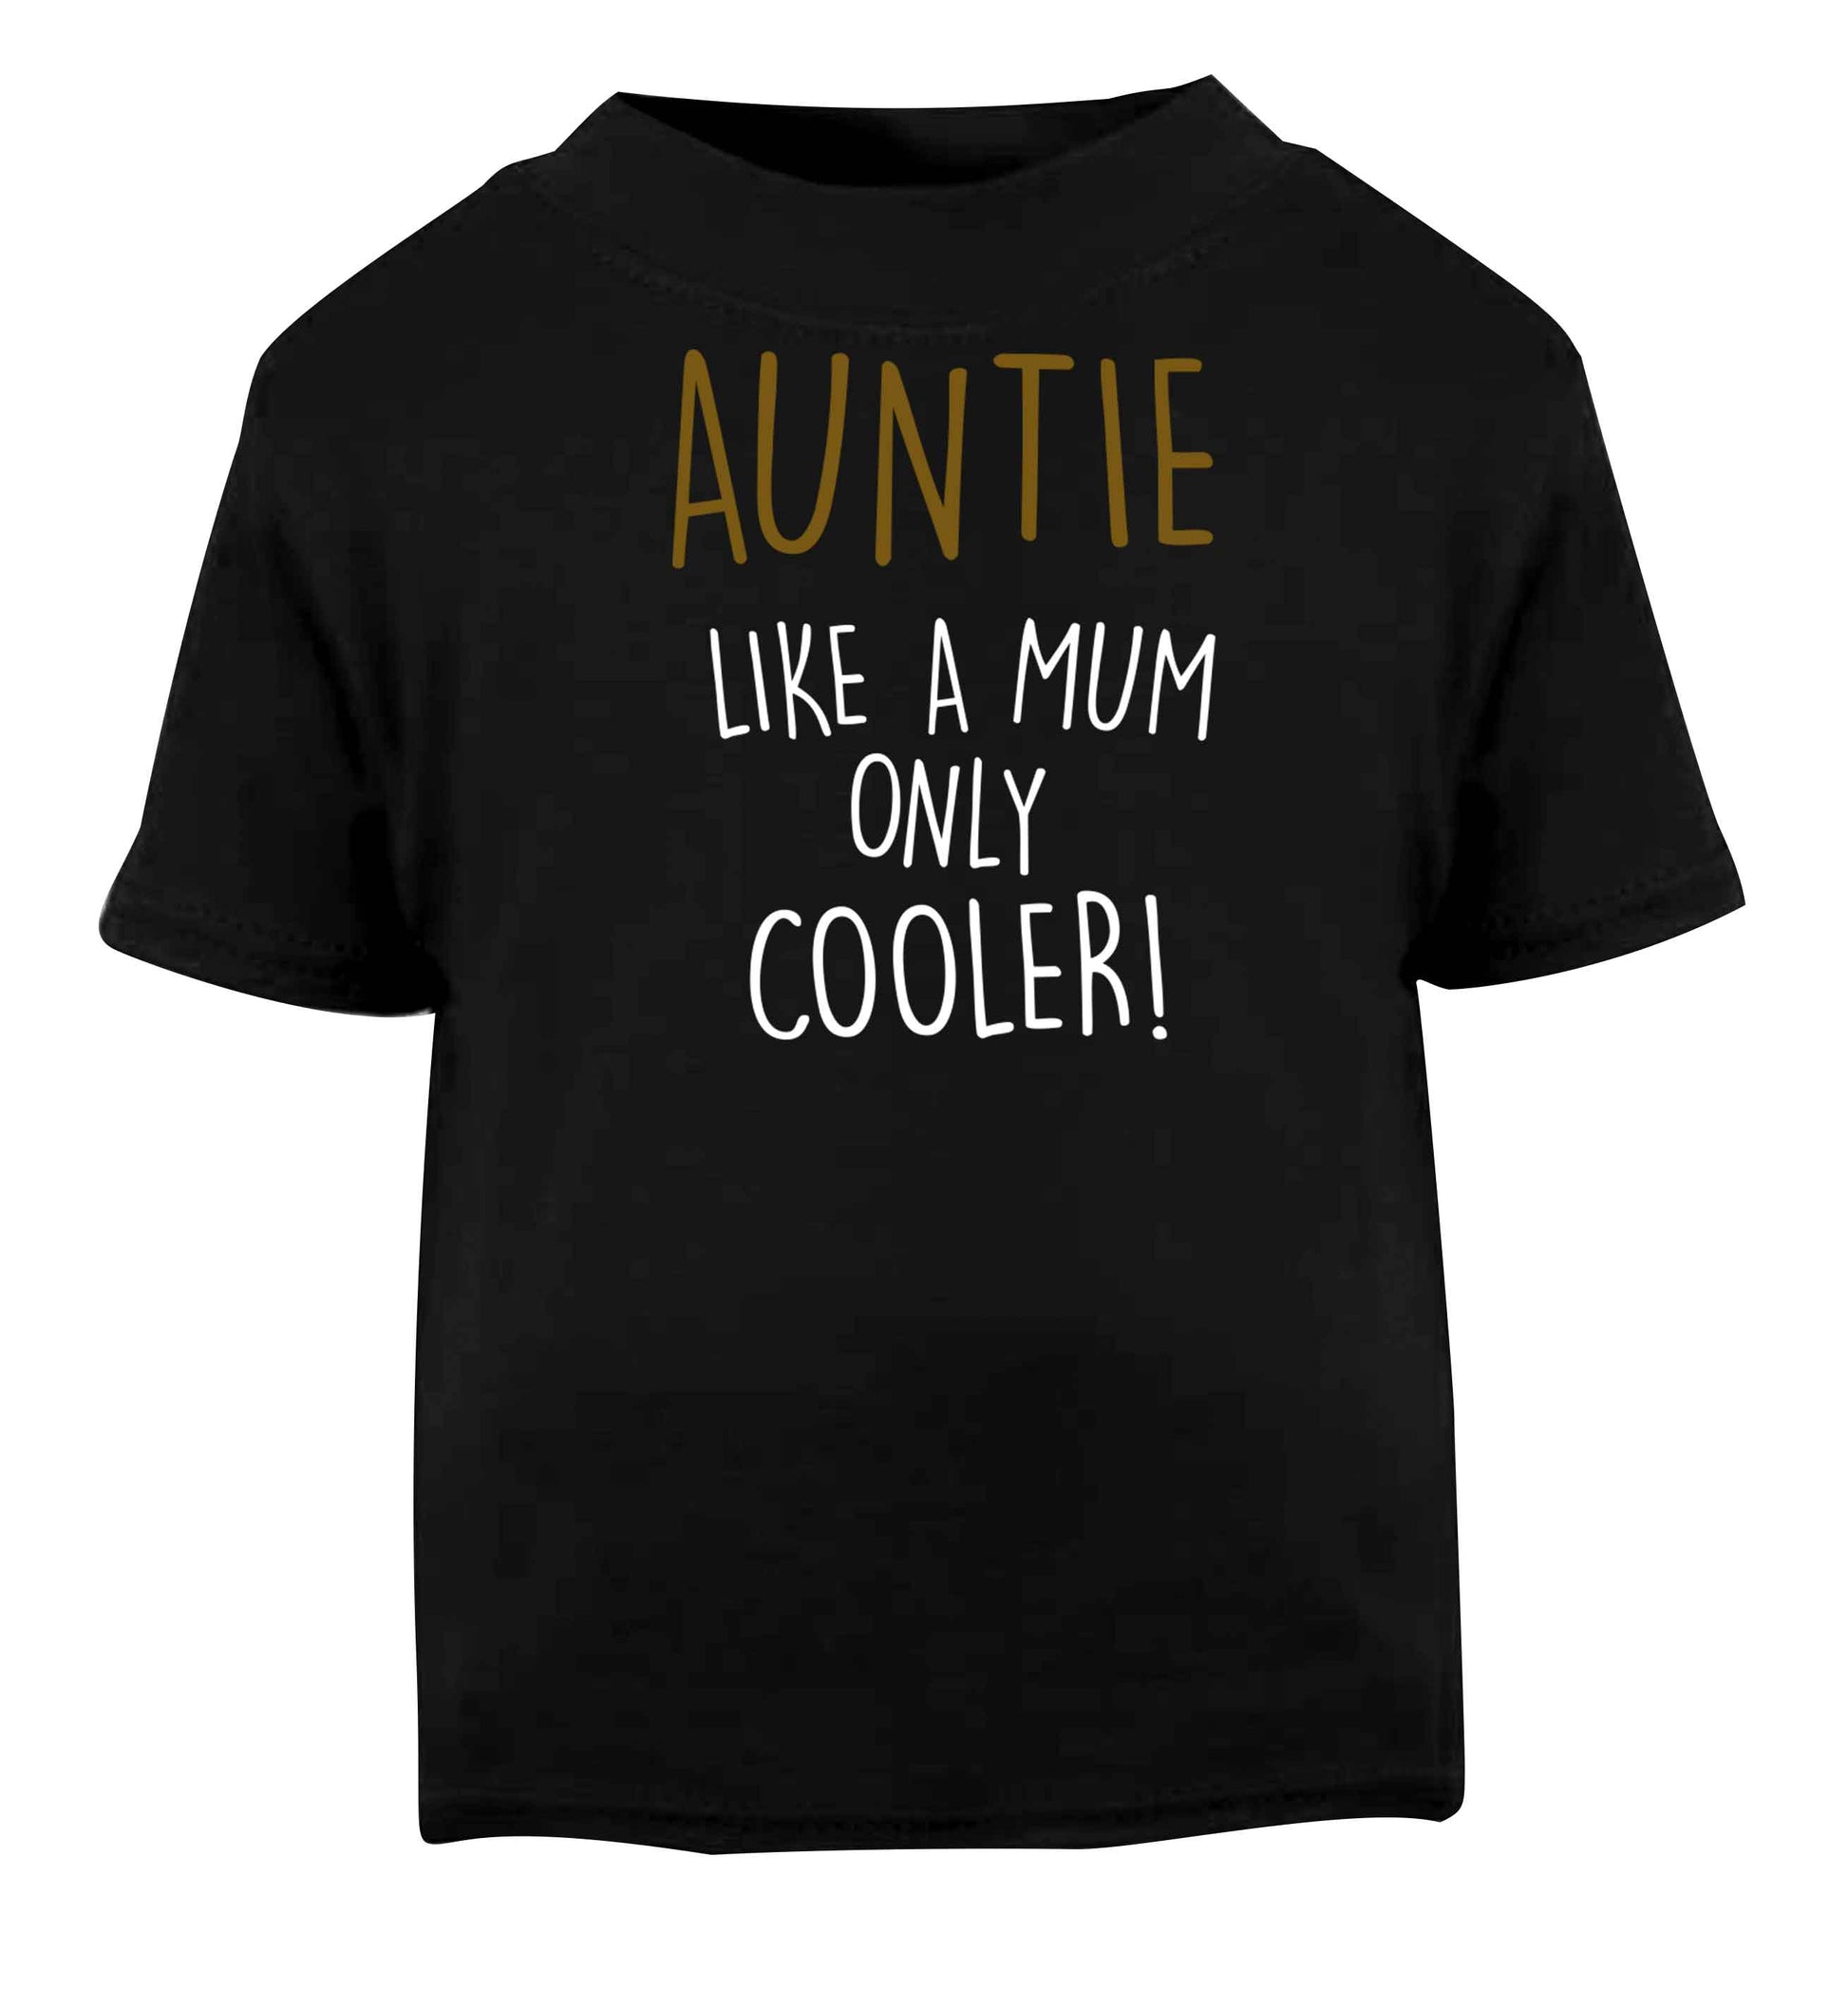 Auntie like a mum only cooler Black baby toddler Tshirt 2 years